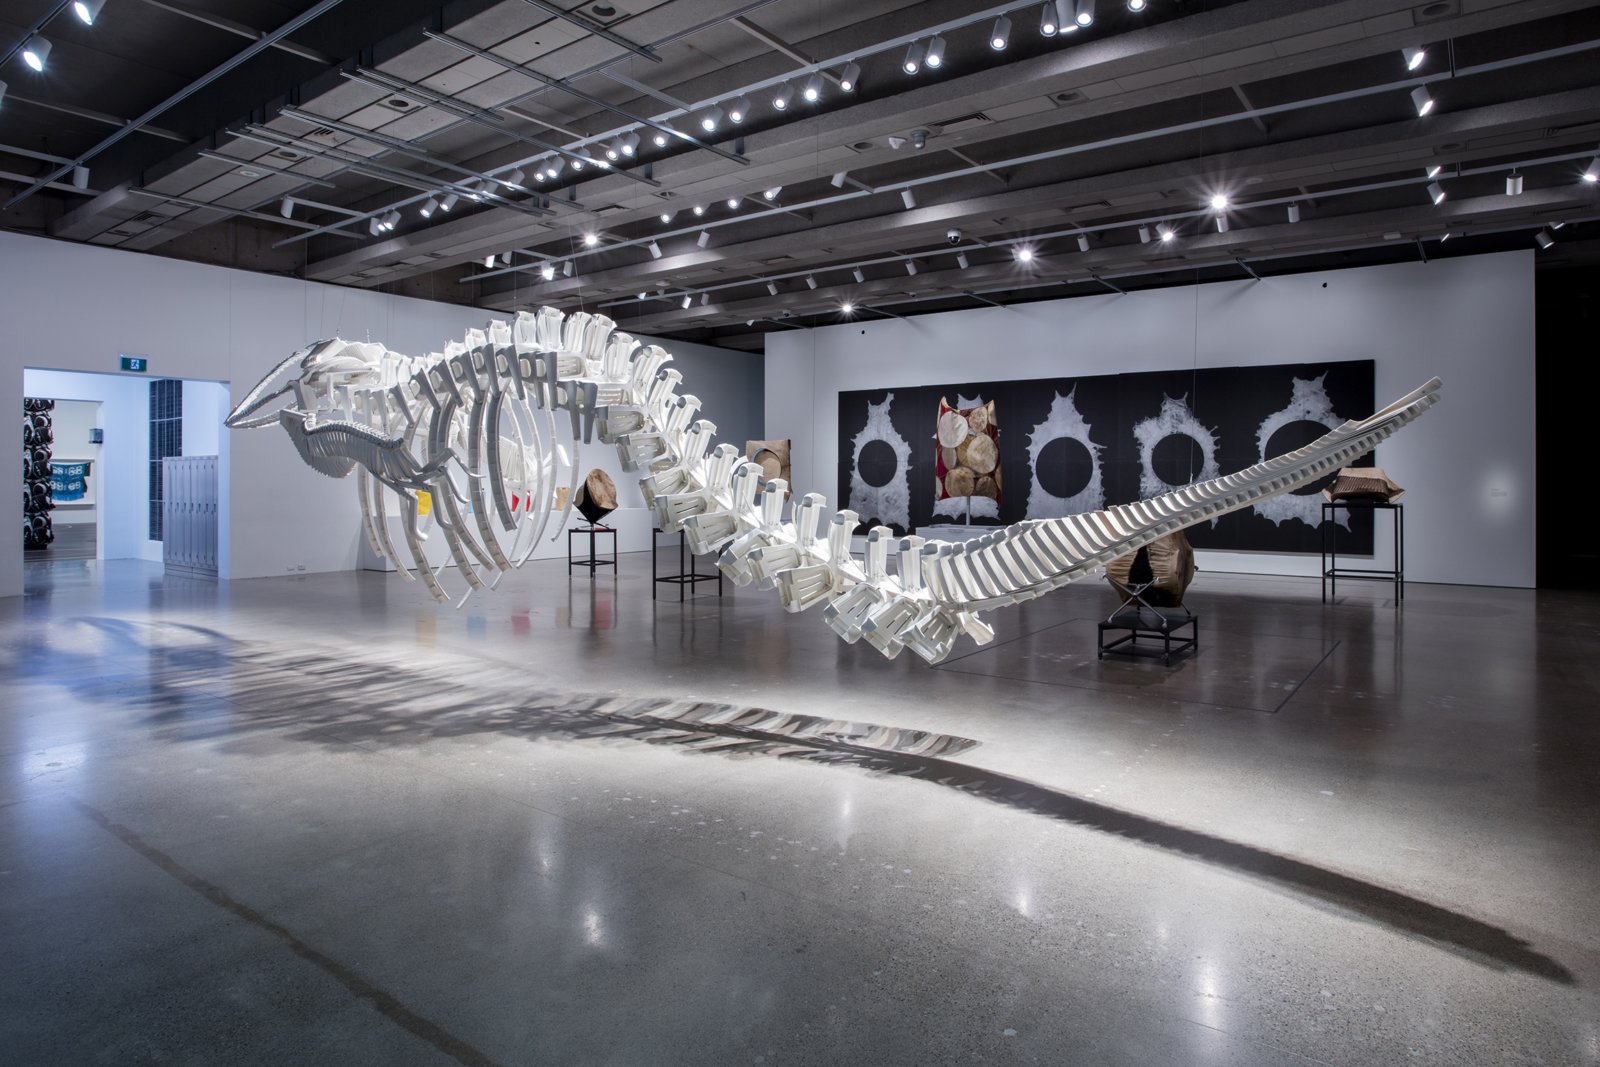 Brian Jungen, Cetology, 2002, plastic chairs, 159 x 166 x 587 in. (404 x 422 x 1491 cm). Installation view, Friendship Centre, Art Gallery of Ontario, Toronto, Canada, 2019